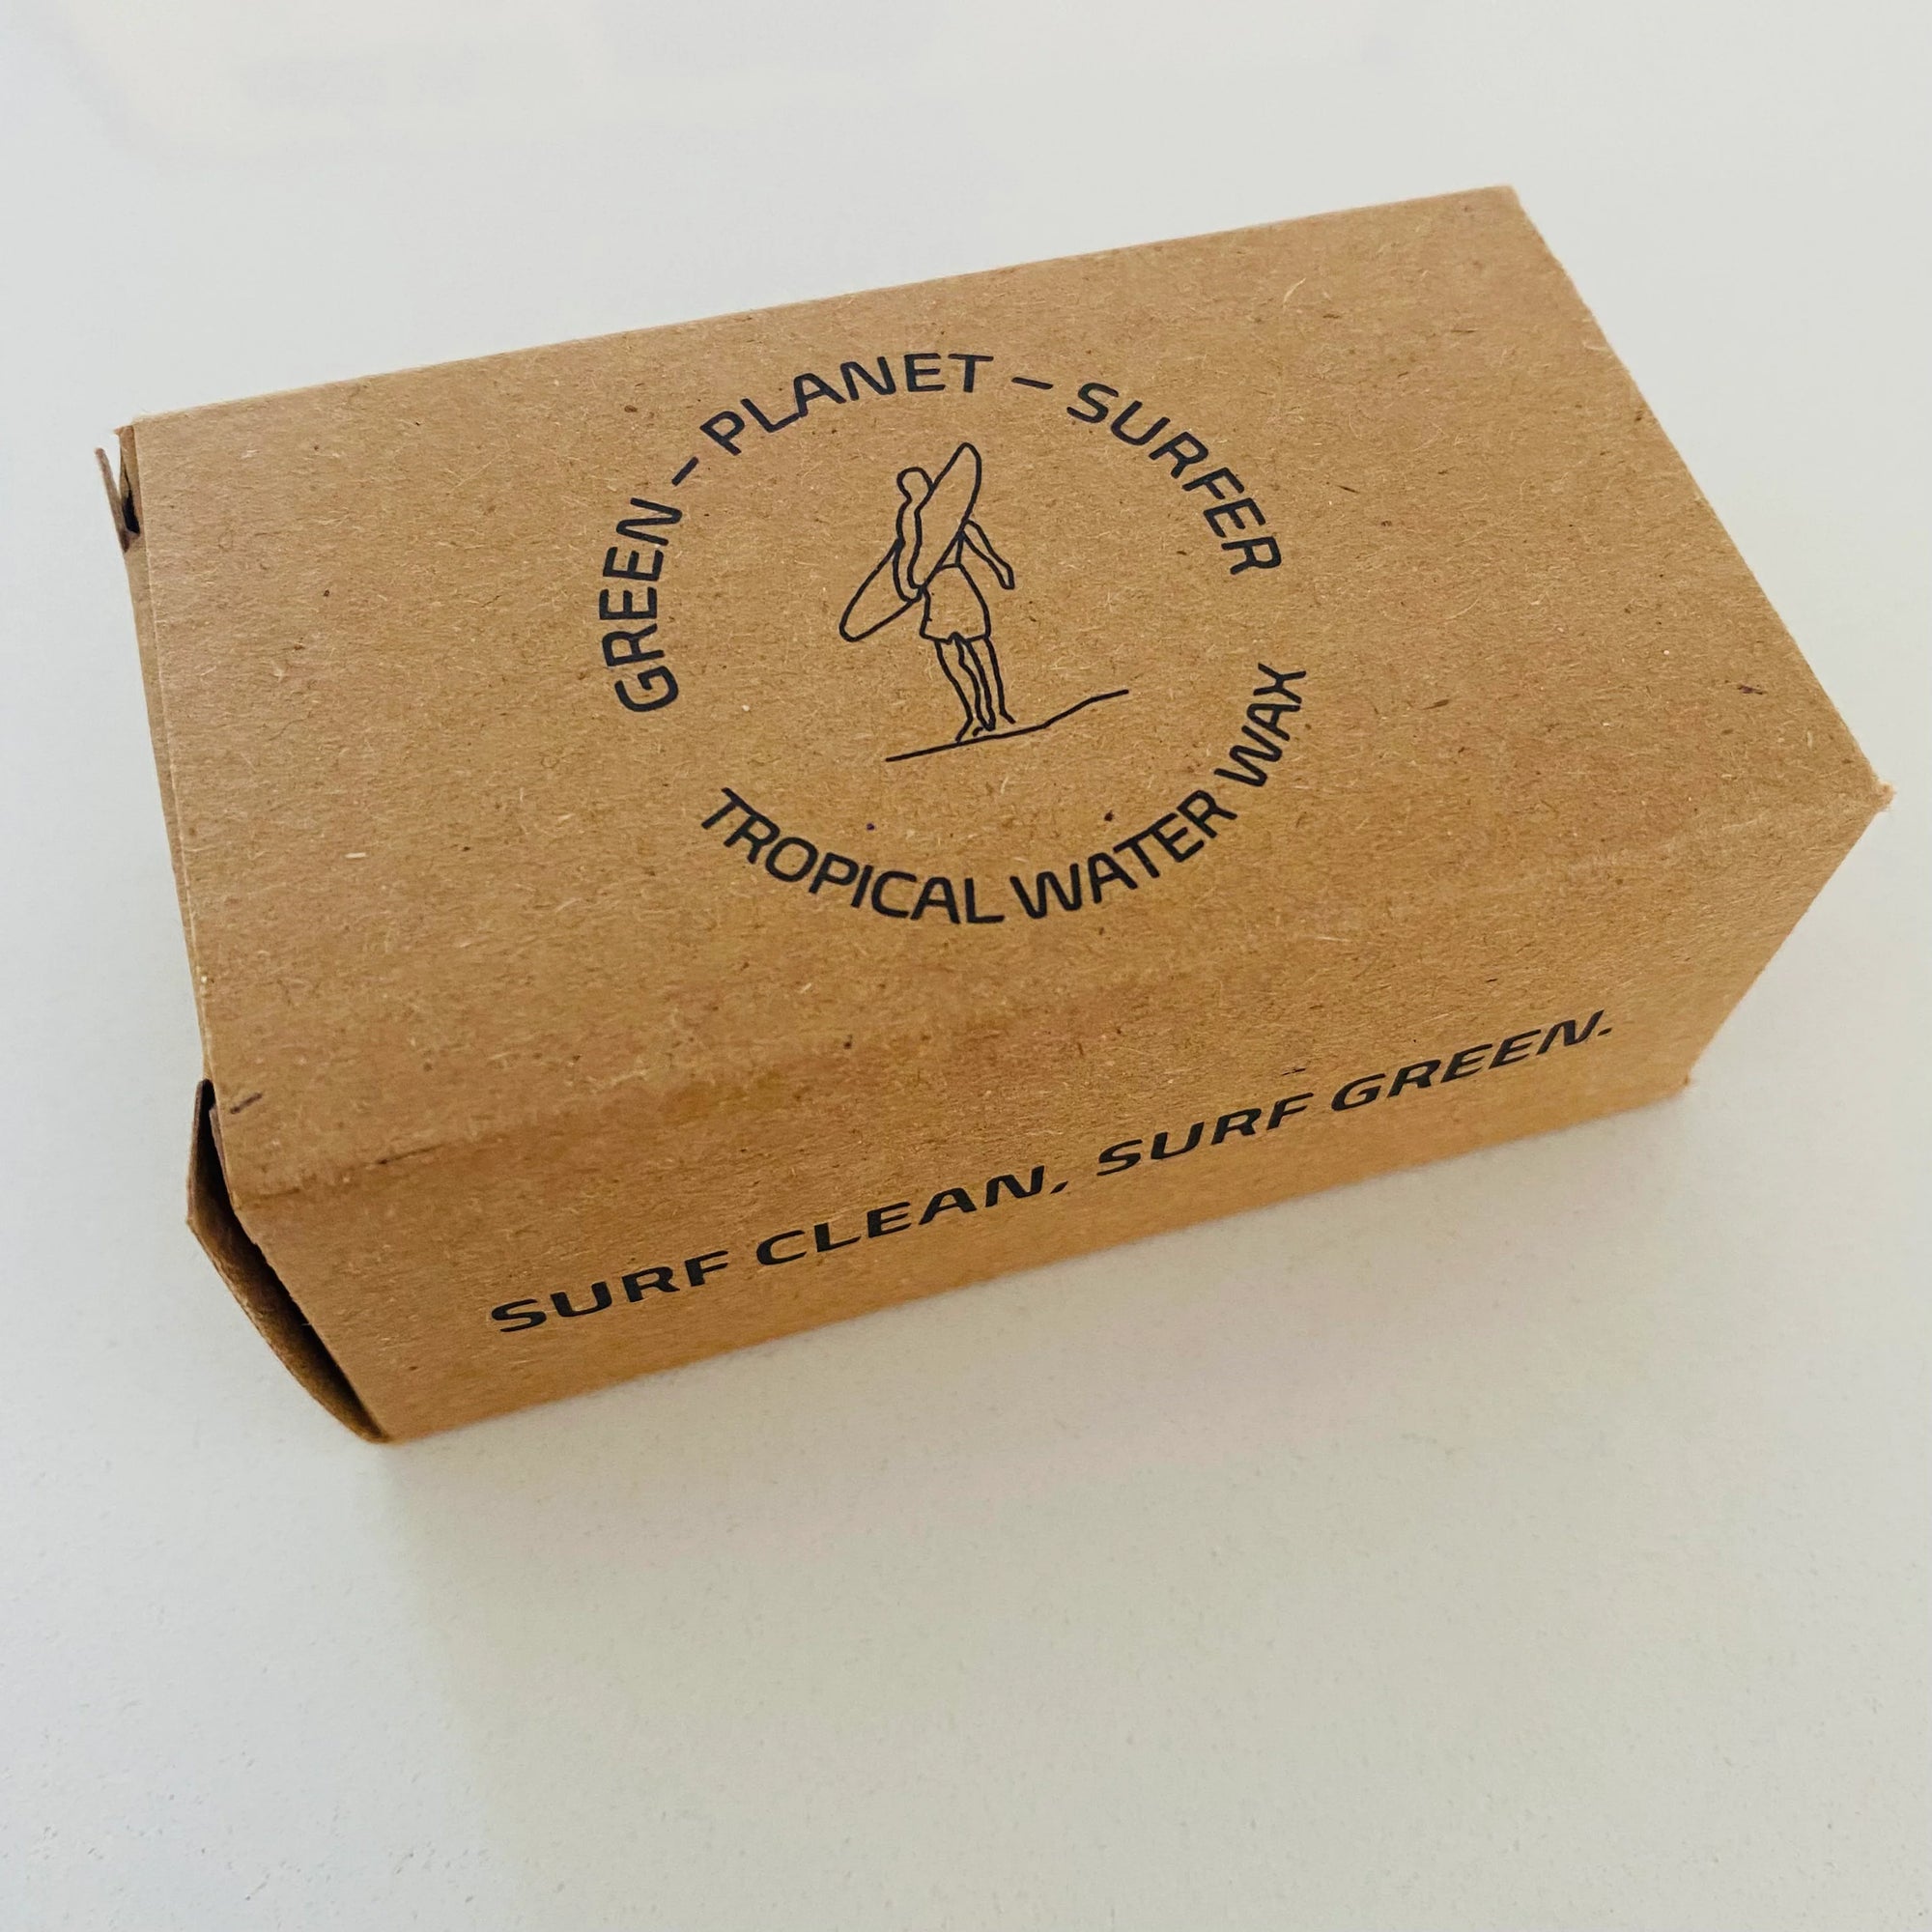 Green Planet Surfer Eco Surf Wax - Sunny Bliss